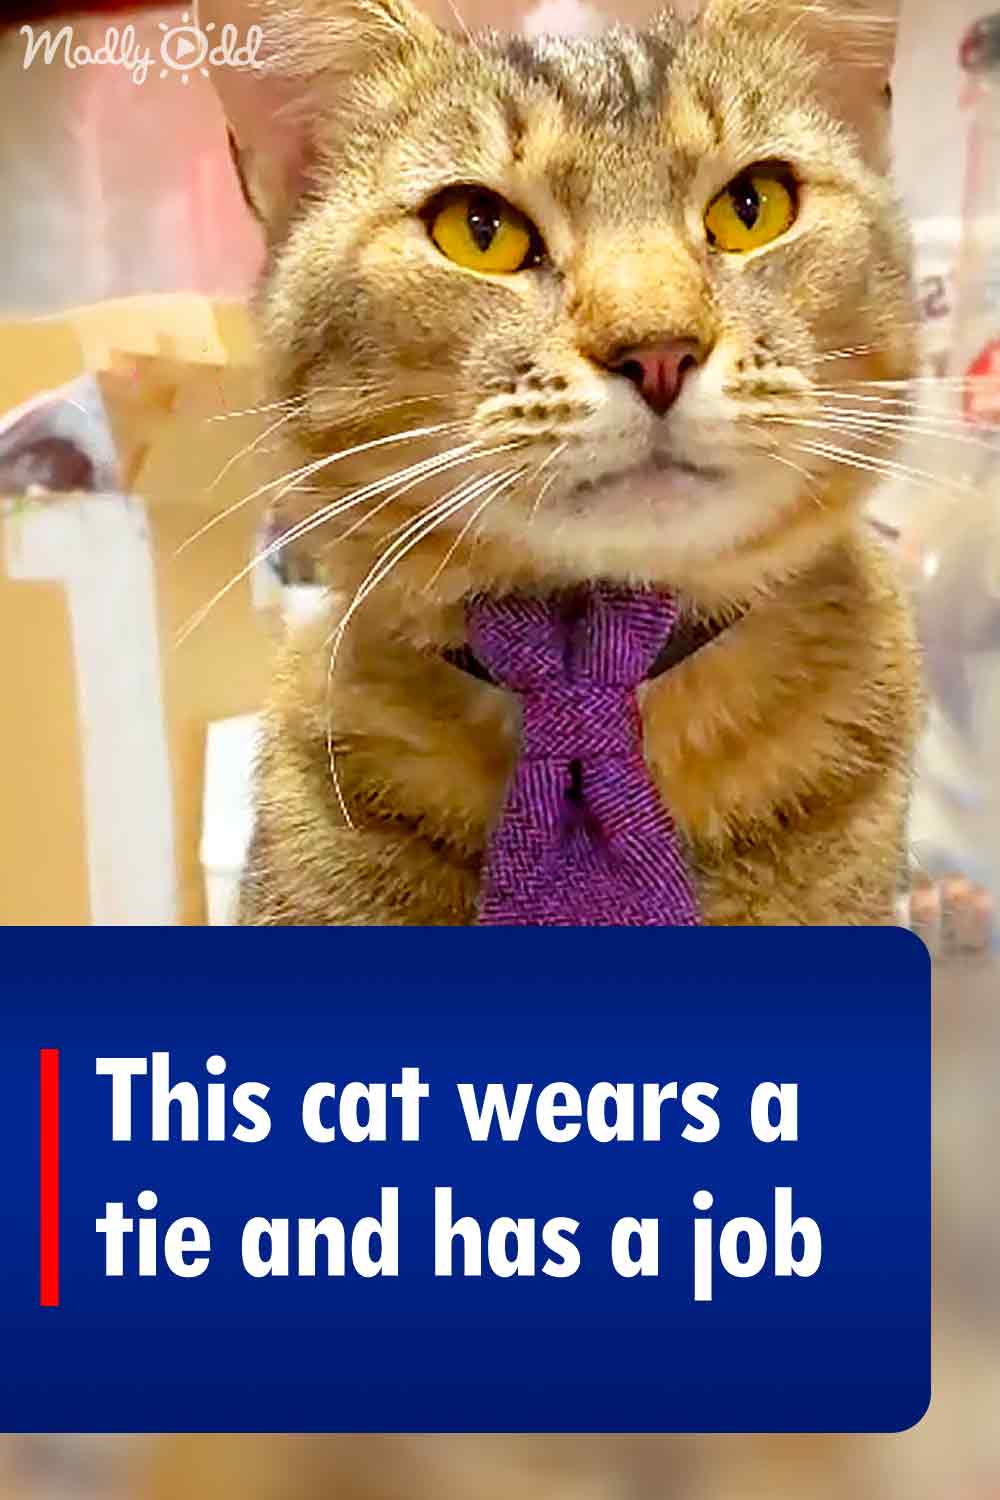 This cat wears a tie and has a job